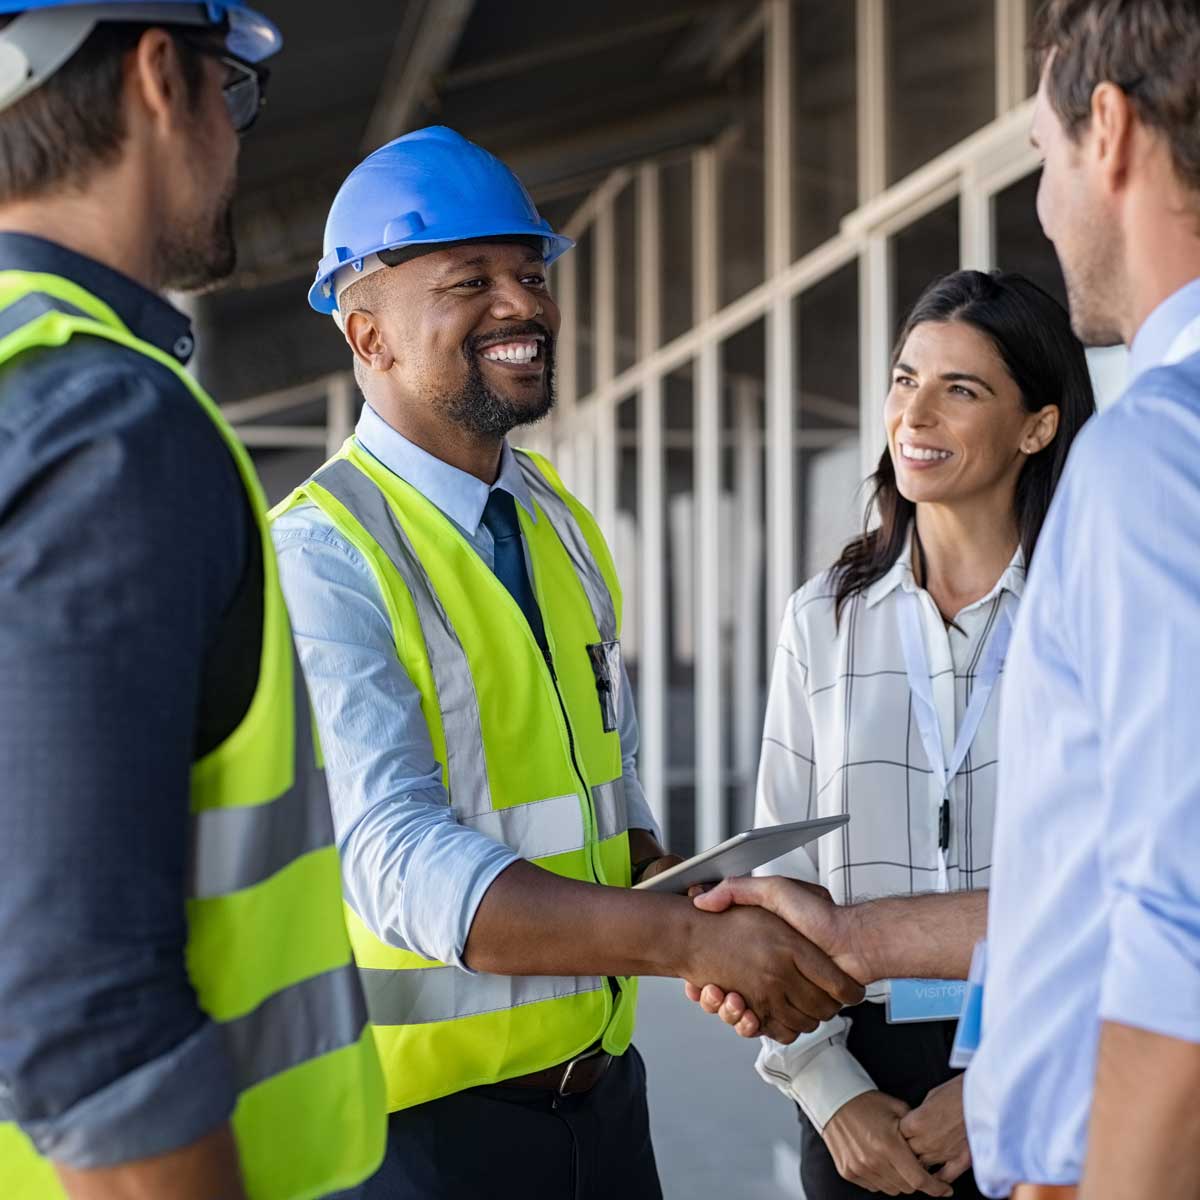 Contractor in construction and supportive employer handshake at construction site when discussing retention strategies for employees; image of four people, two of which are contractors, the other two are in business attire